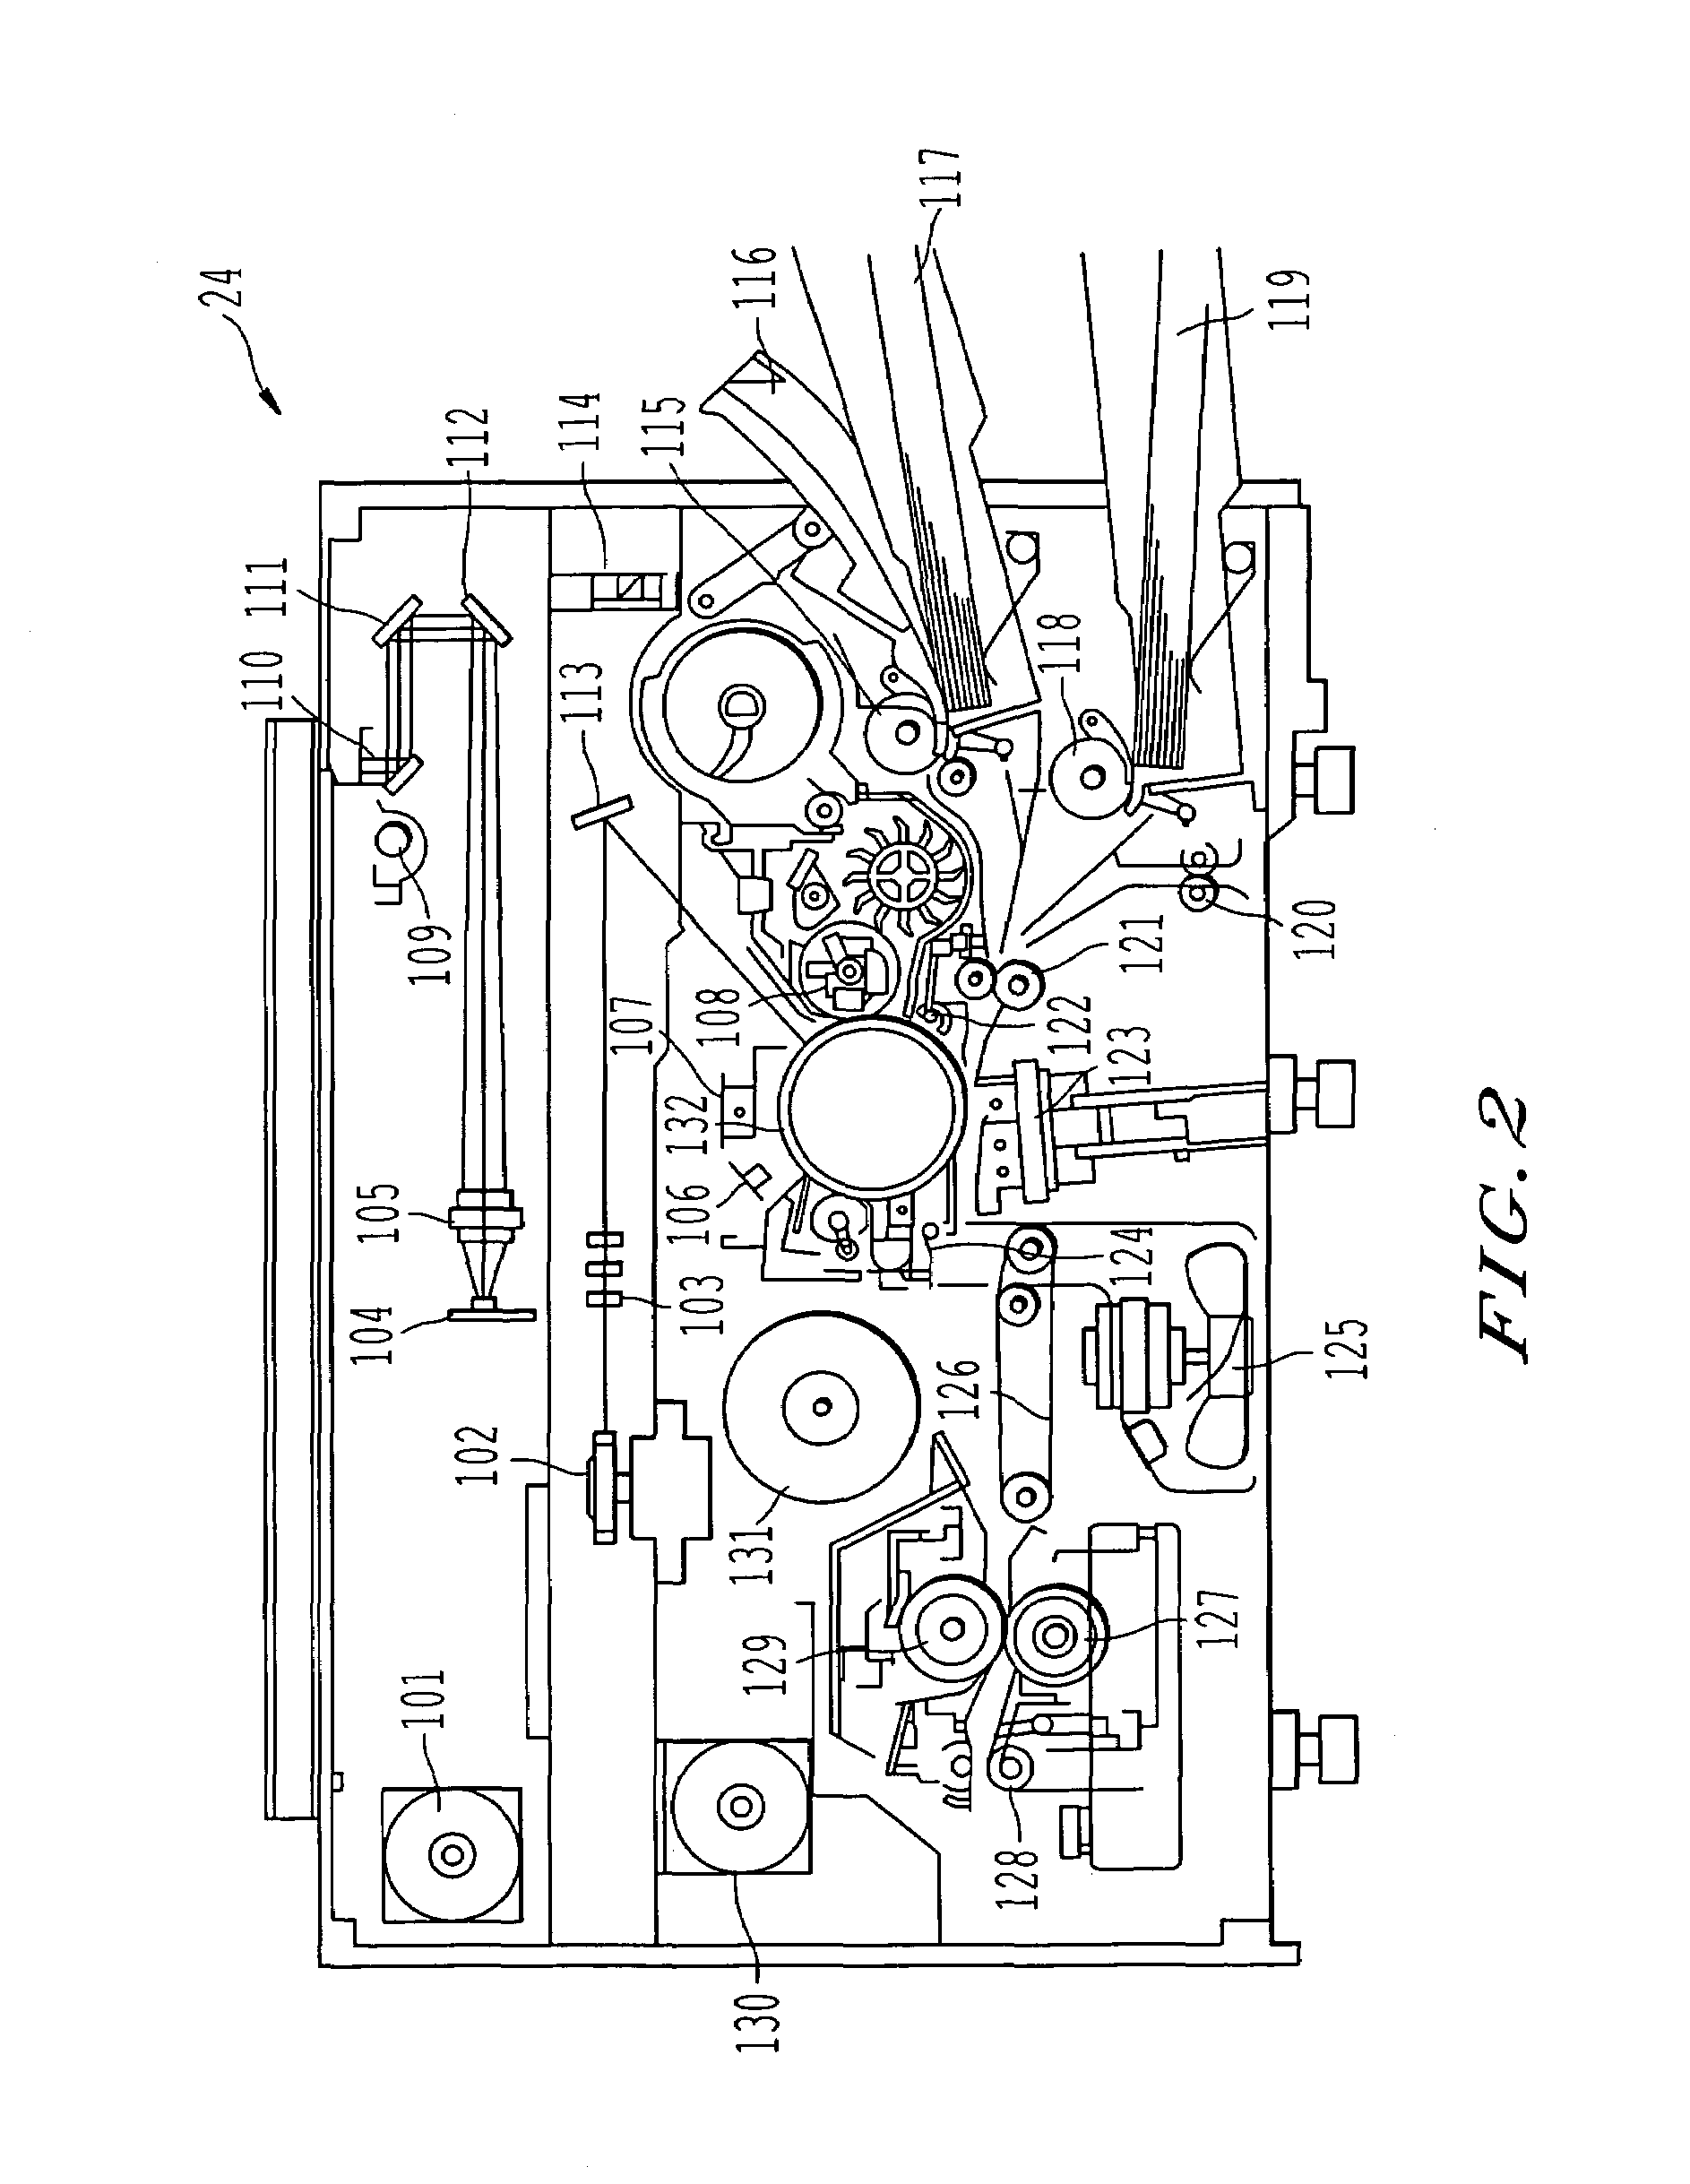 Method and system for diagnosis and control of machines using connection and connectionless modes of communication